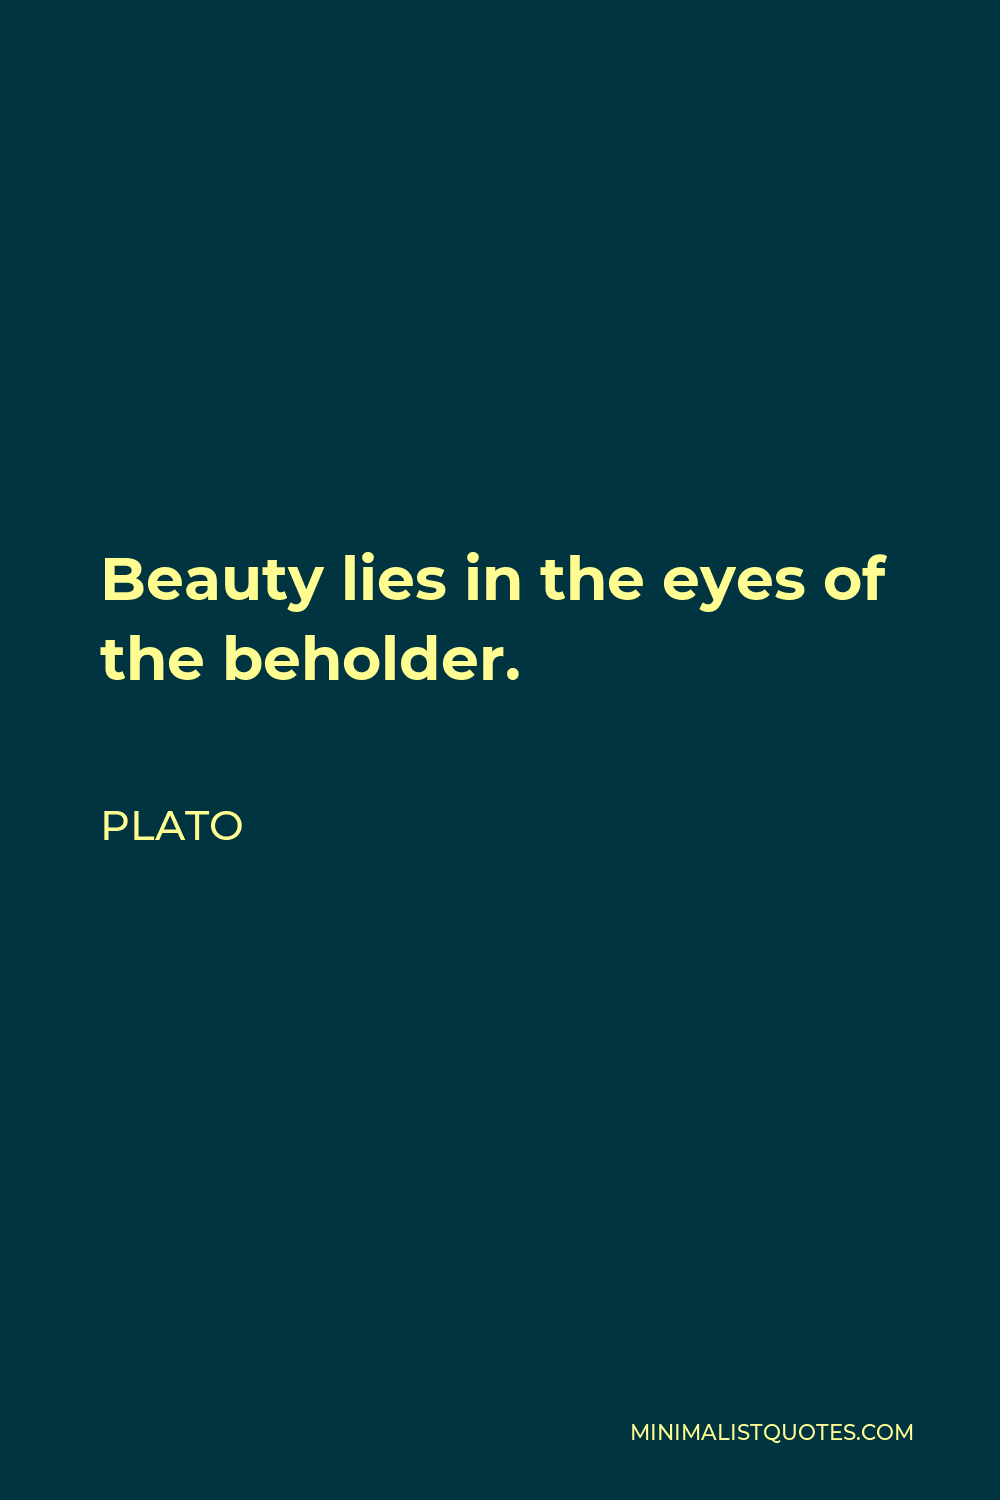 Plato Quote - Beauty lies in the eyes of the beholder.